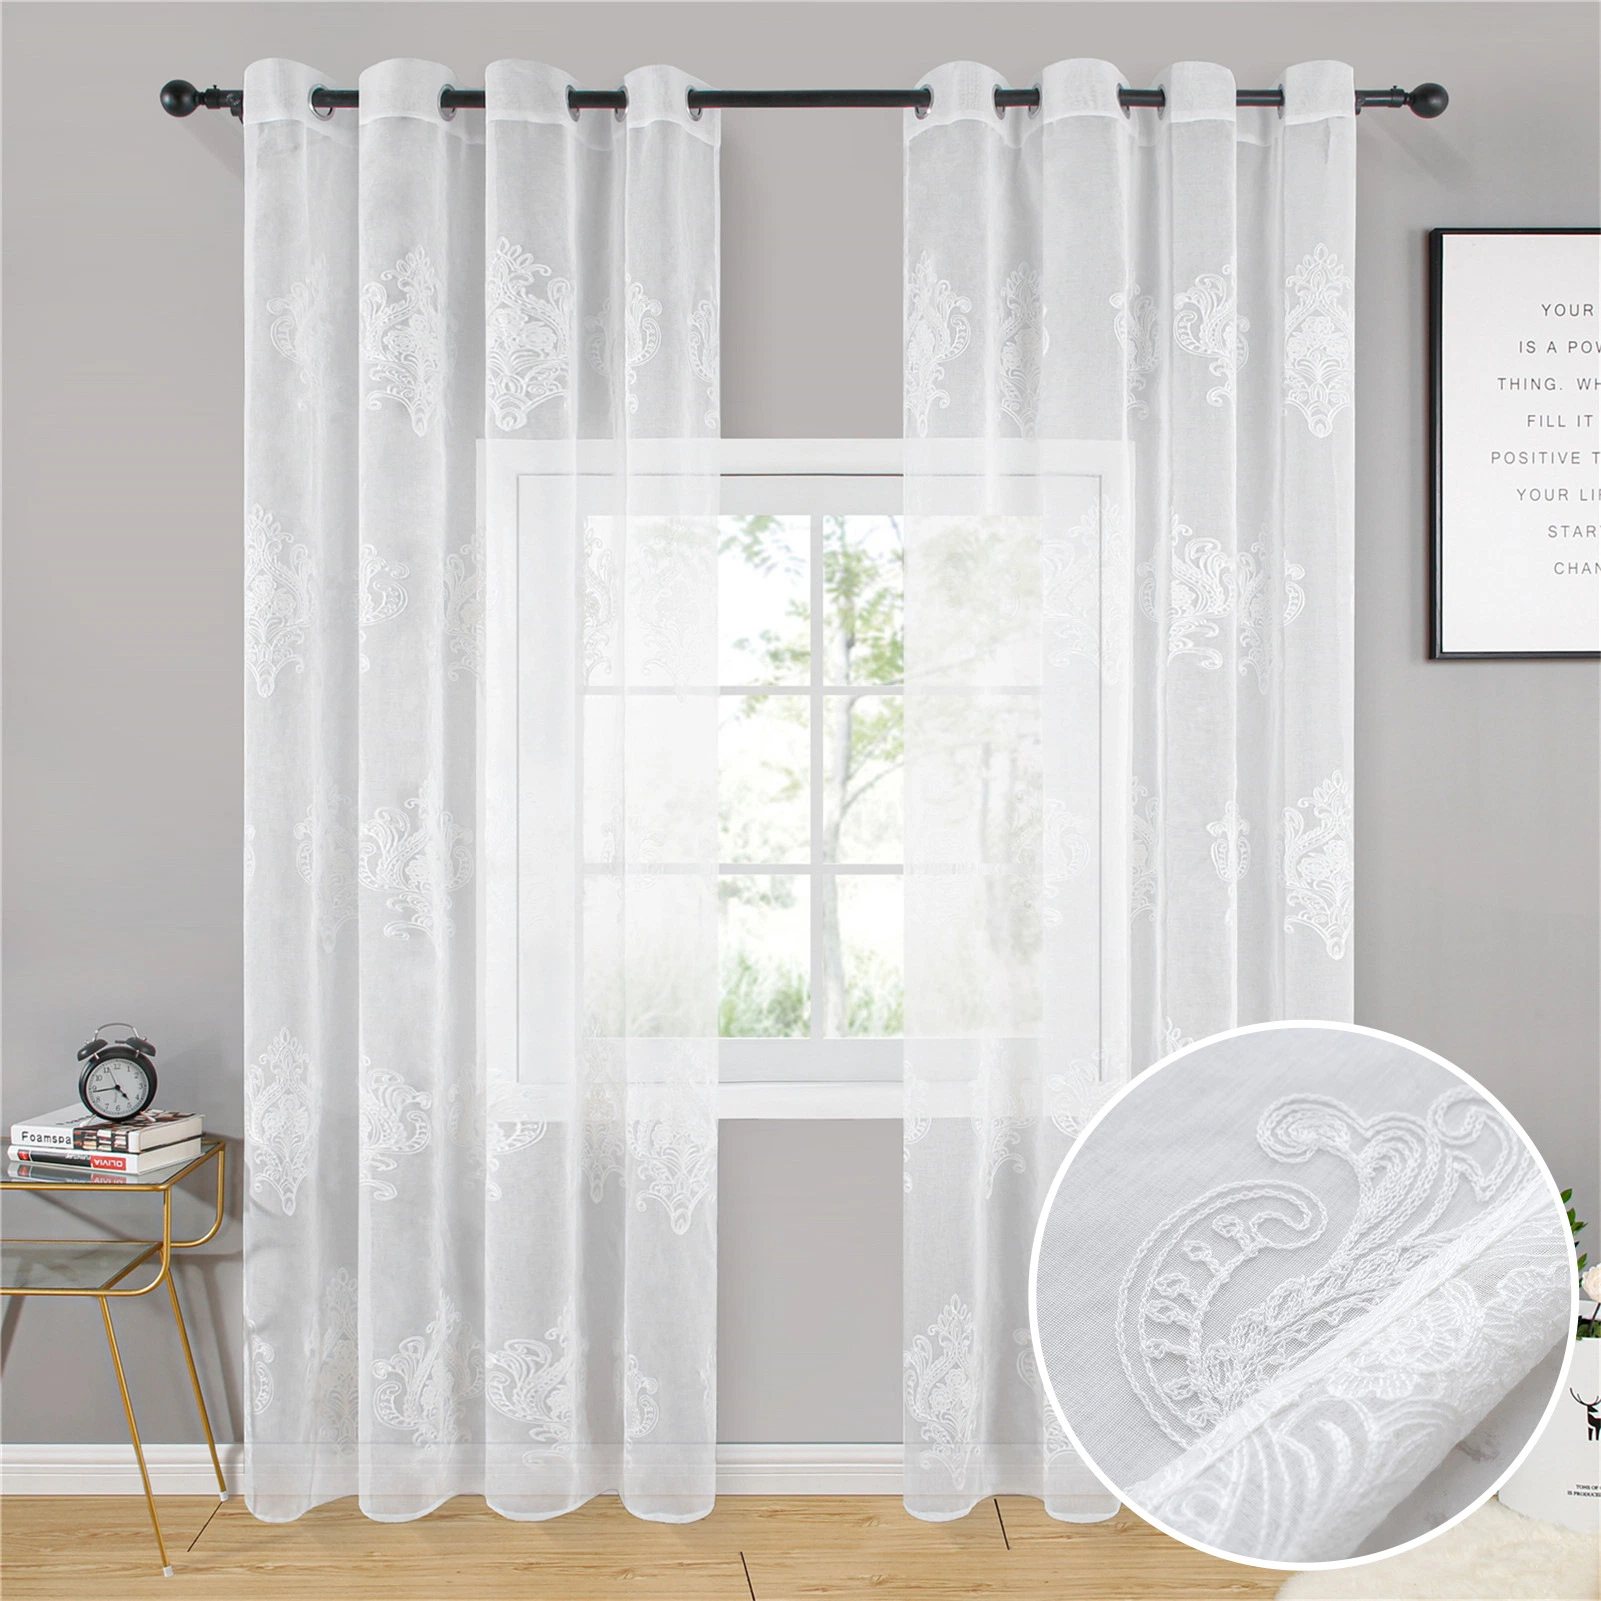 on Sale Embroidery Curtain Yarn Sheer Curtains